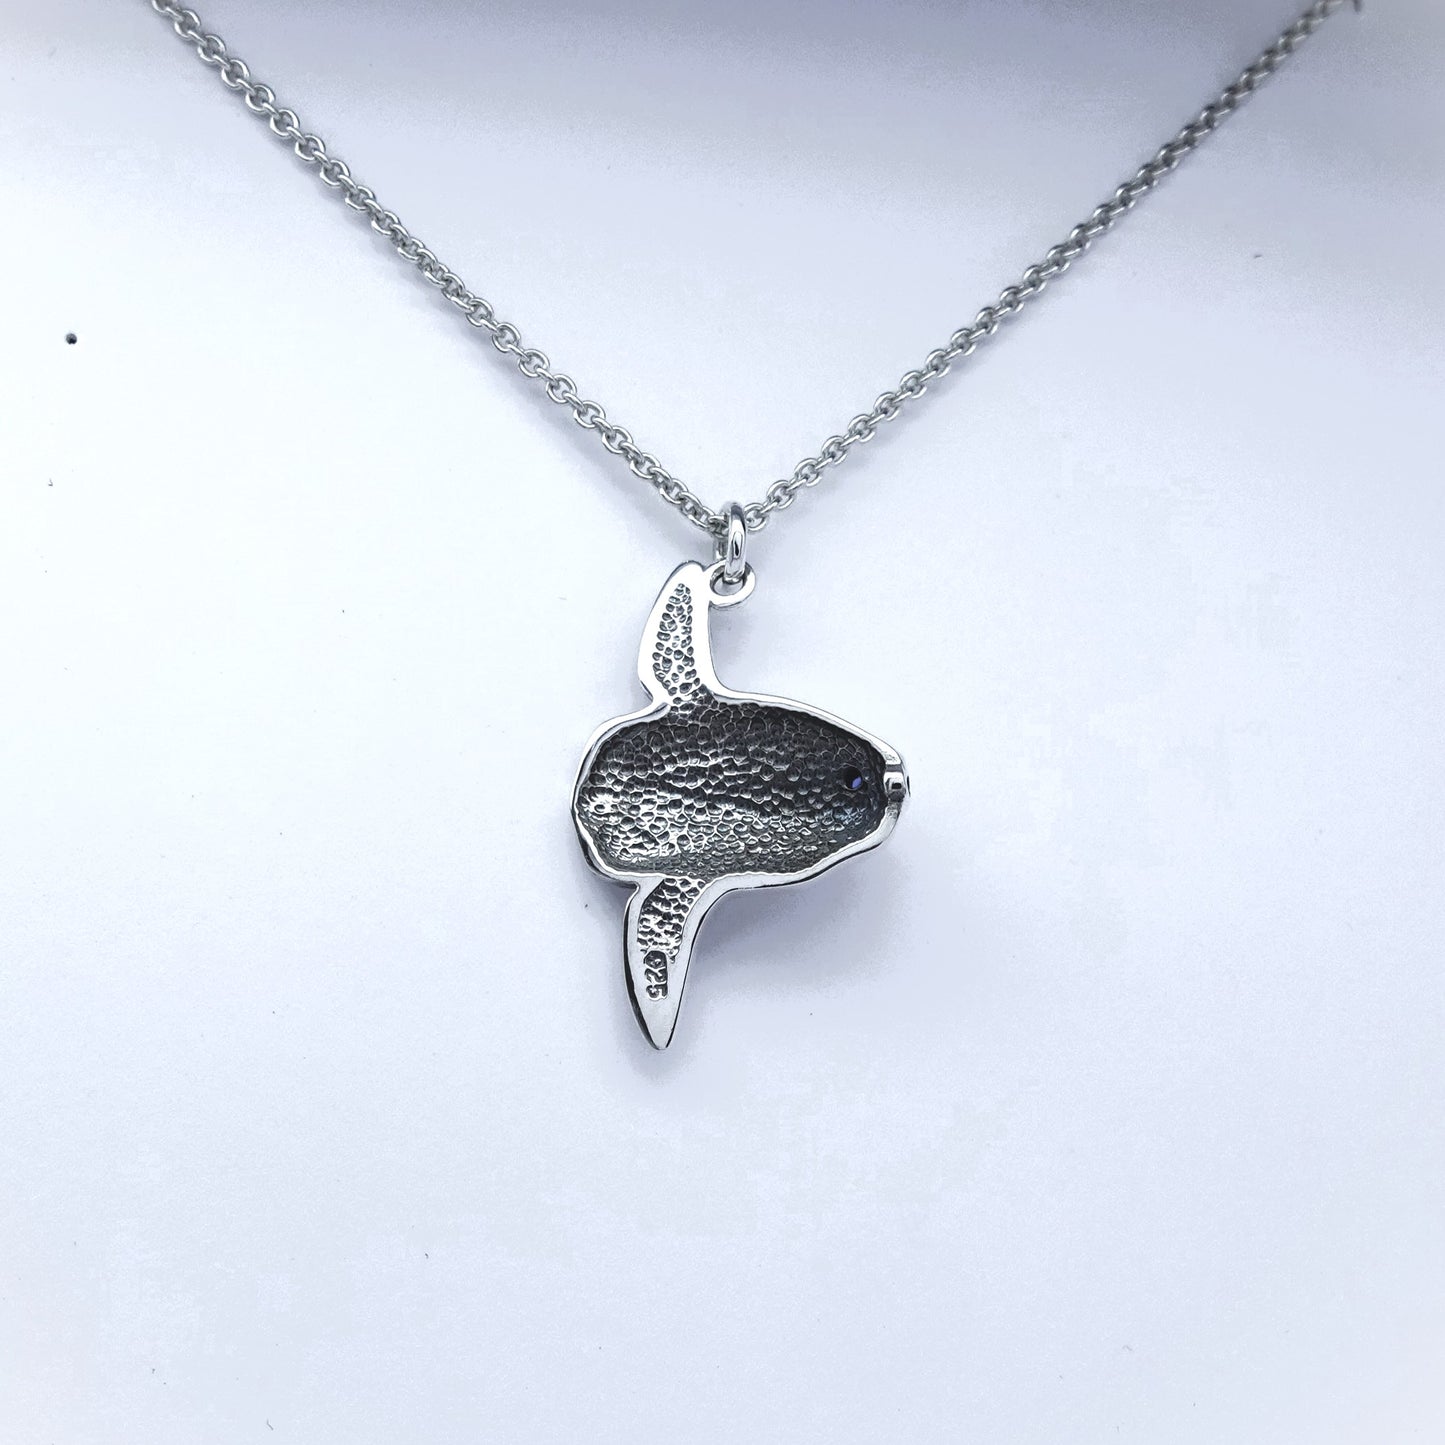 Mola mola necklace. Made from sterling silver with an antiqued finish, set with a gemstone eye. Ocean sunfish or moonfish © Adrian Ashley